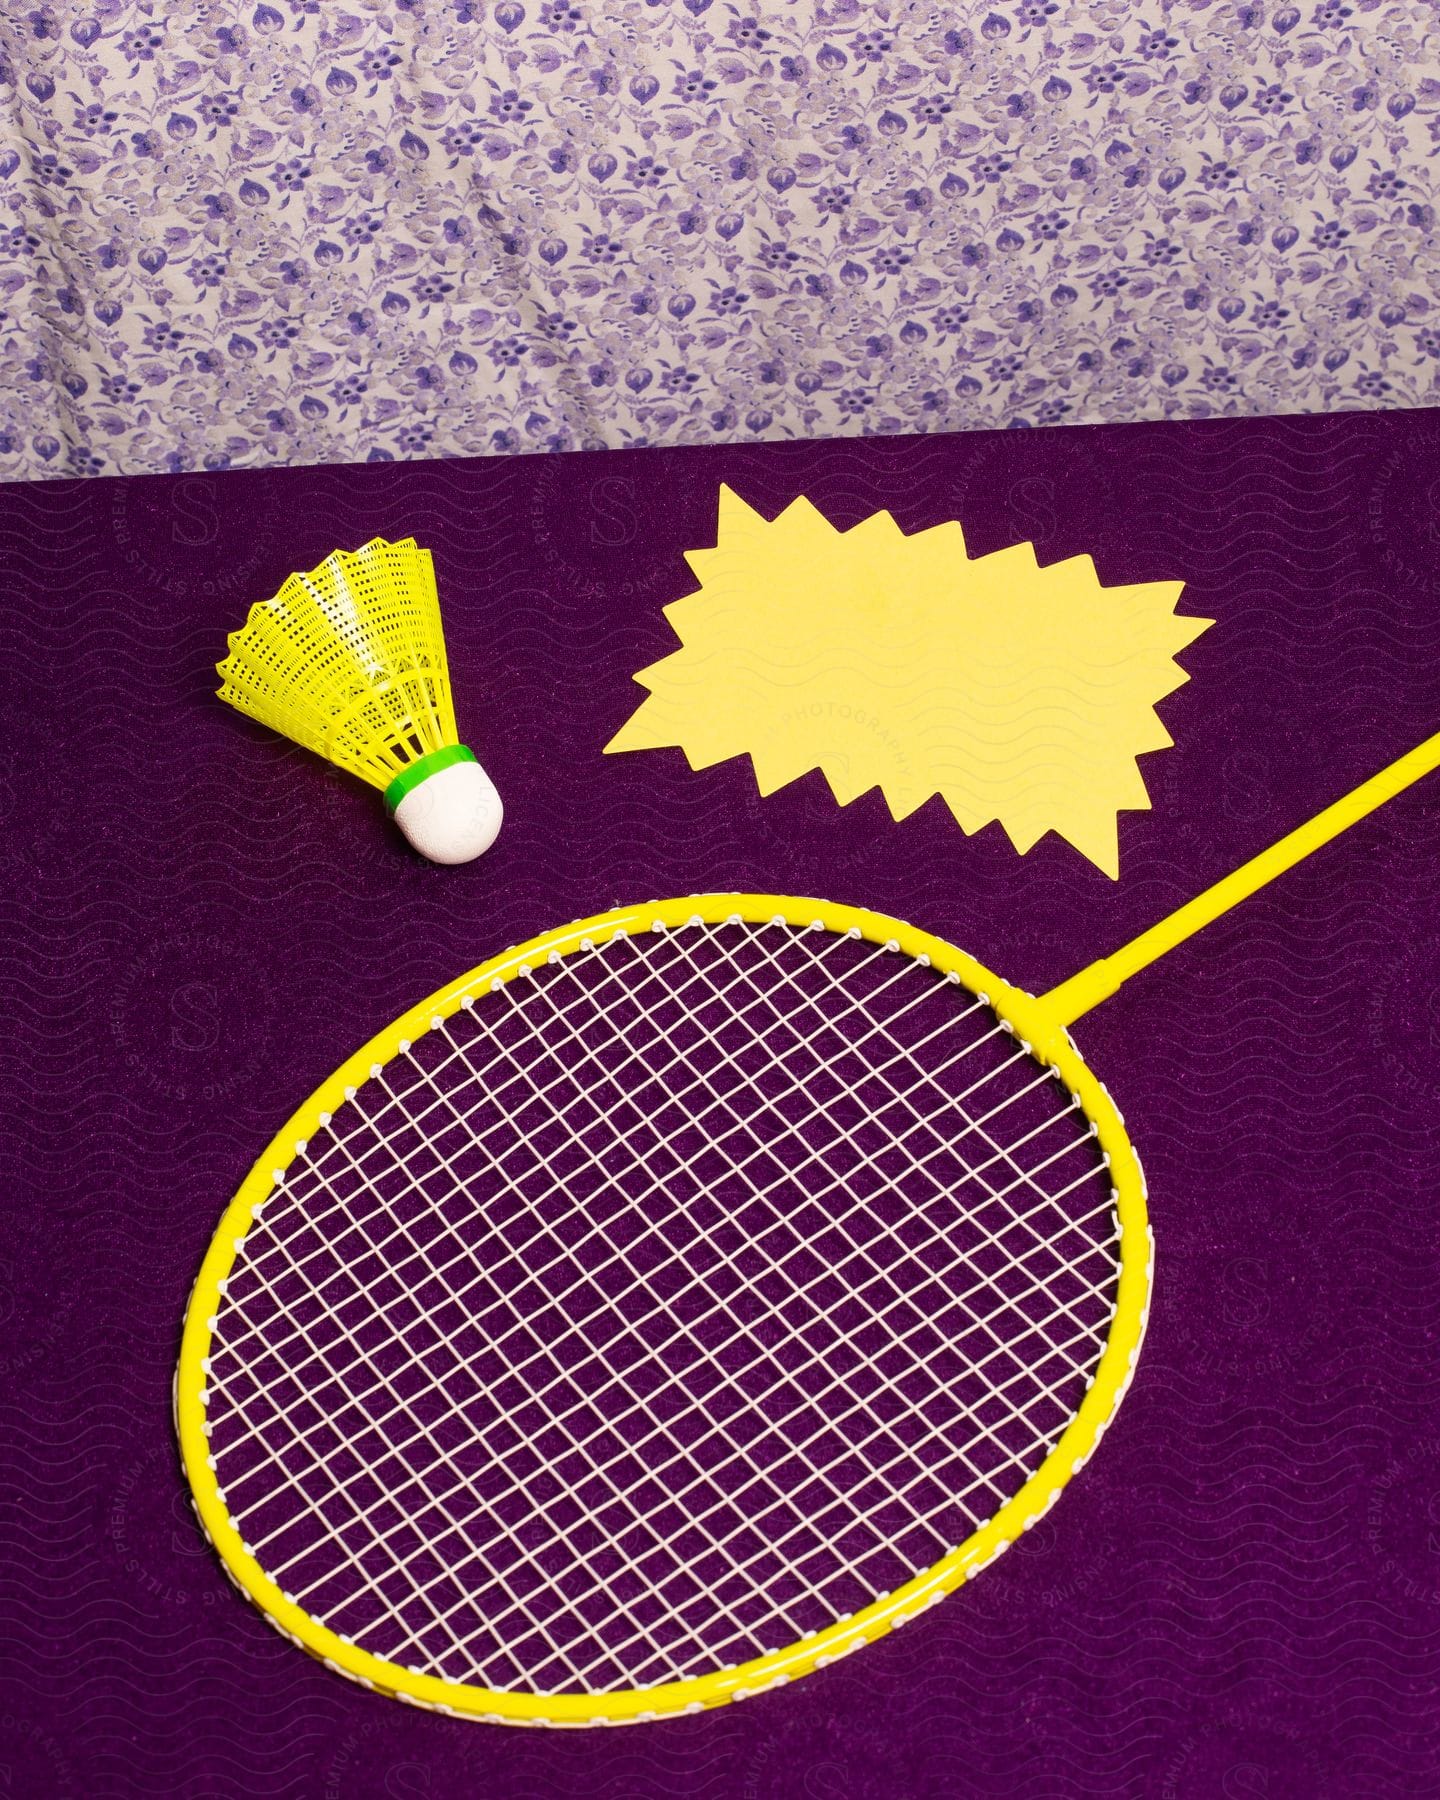 A badminton racket sitting out on a table with a birdie next to it.